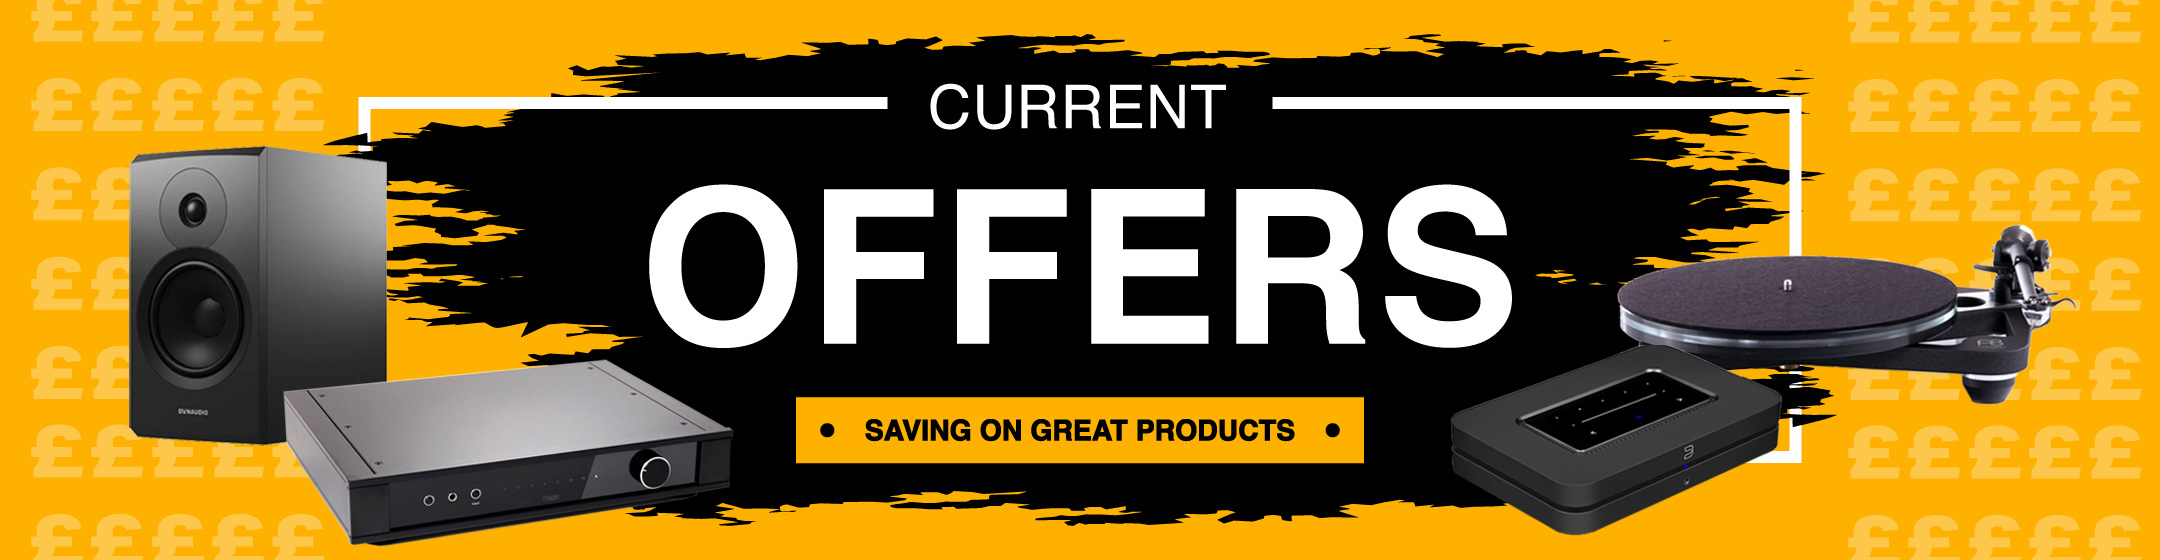 Pic showing bold type reading Current Offers and savings on quality products